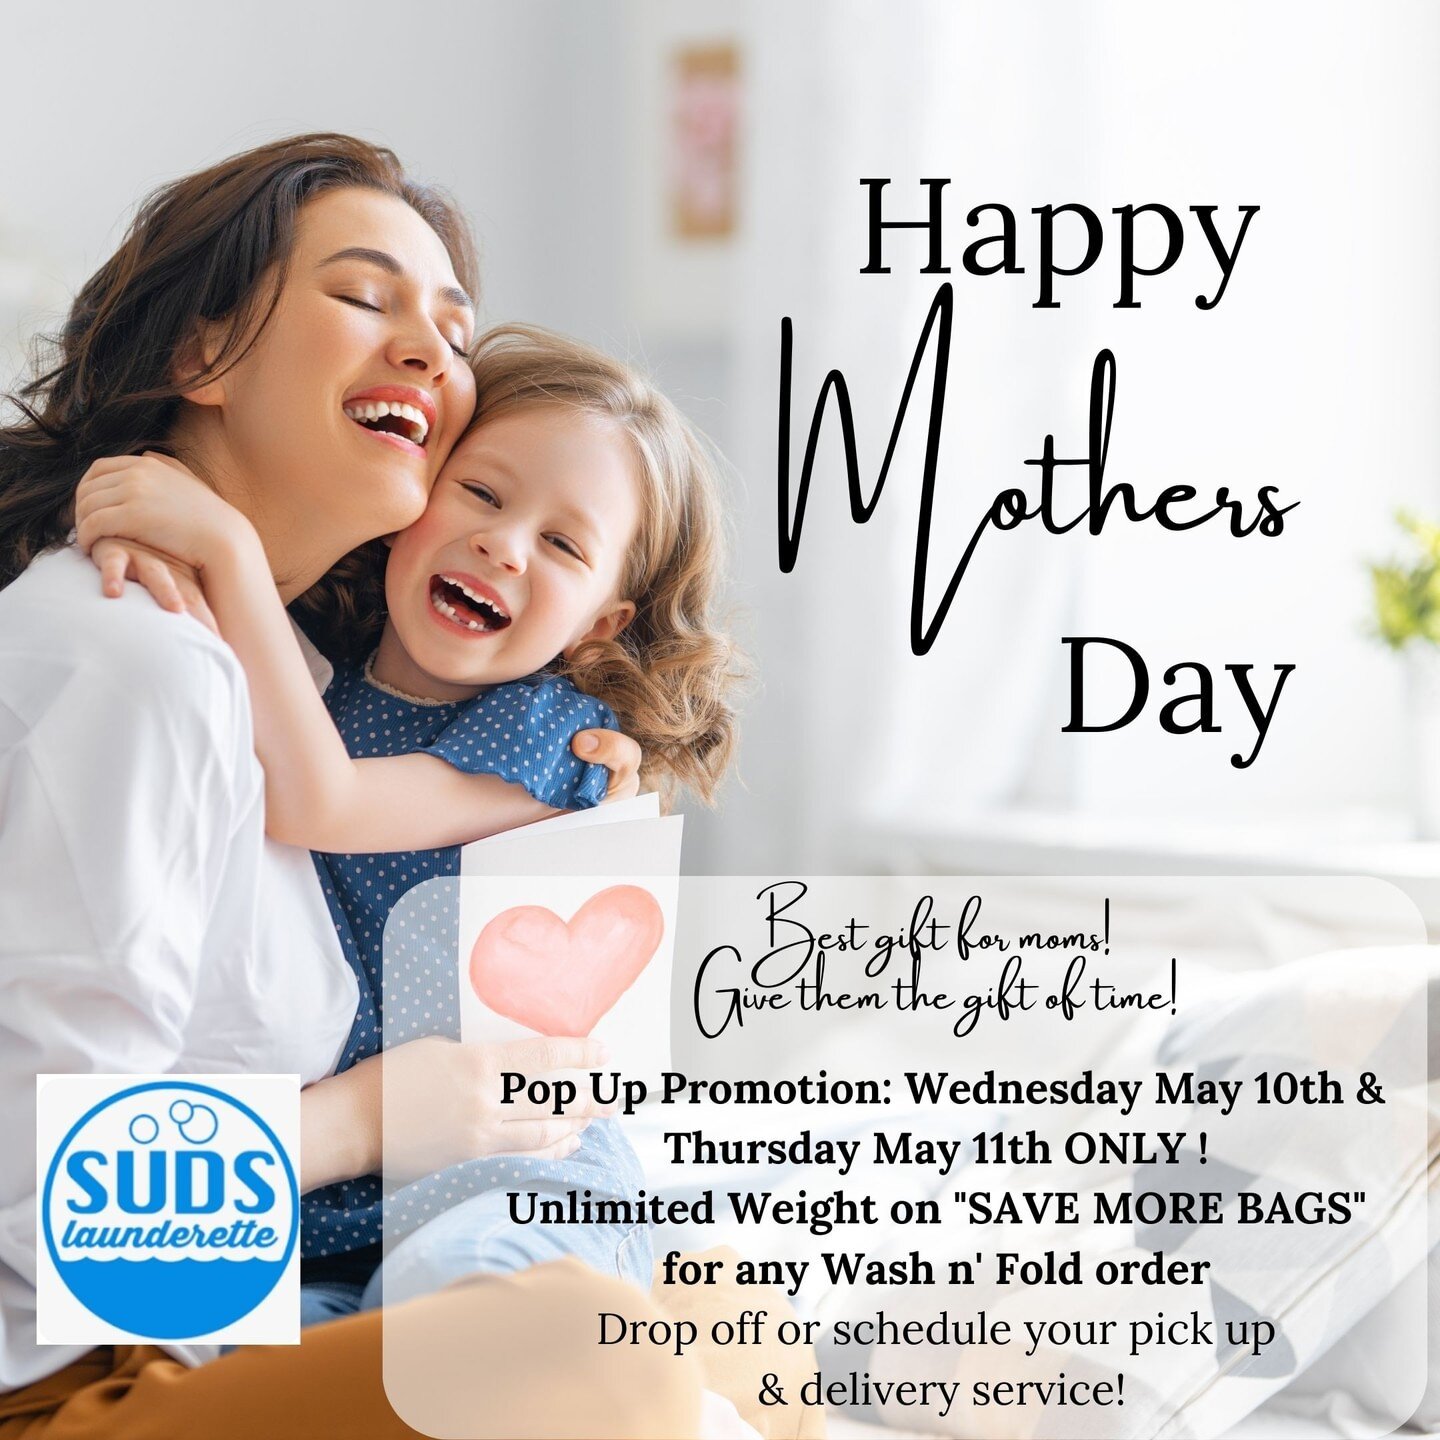 Give yourself (or a special loved one) the gift of time this Mother's day! Pop Up Unlimited weight promotion on Save More bags on Wednesday May 10th and Thursday May 11th this week.